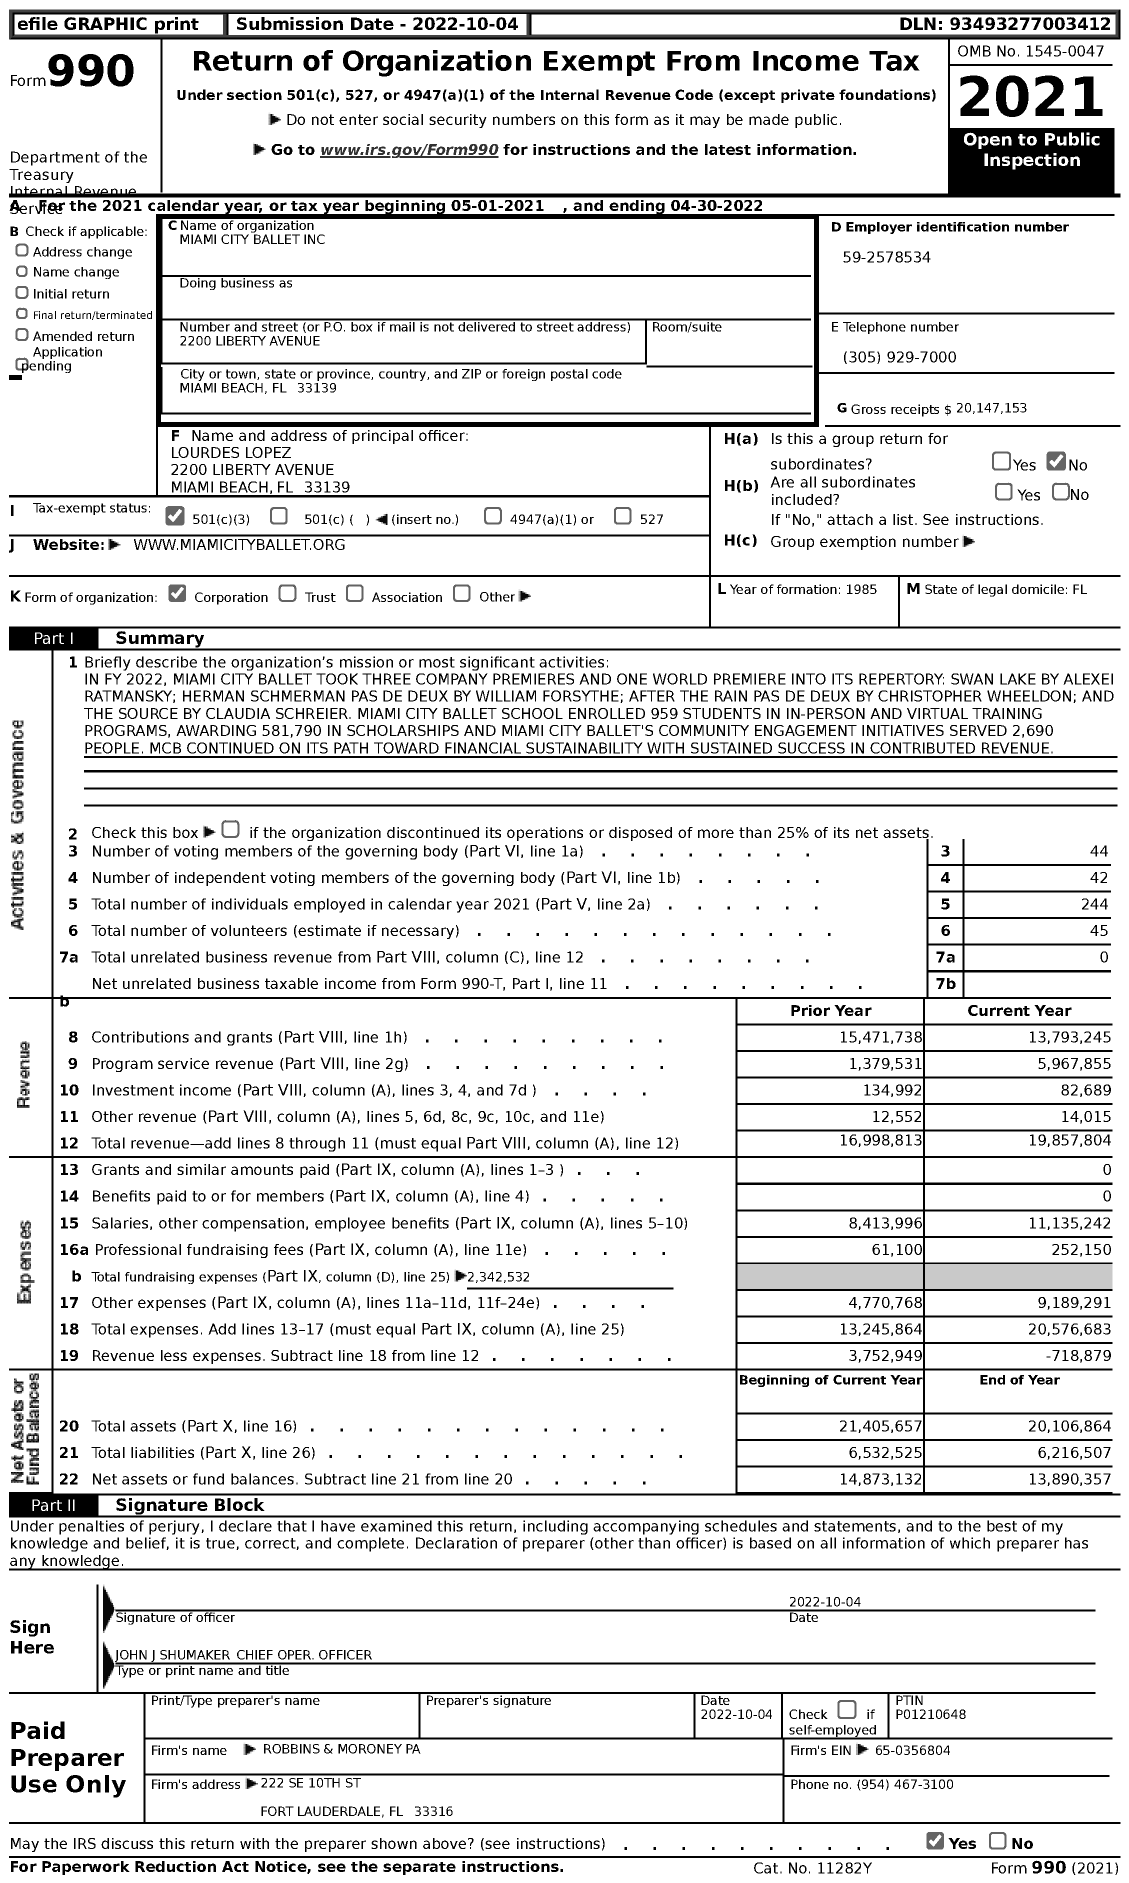 Image of first page of 2021 Form 990 for Miami City Ballet (MCB)